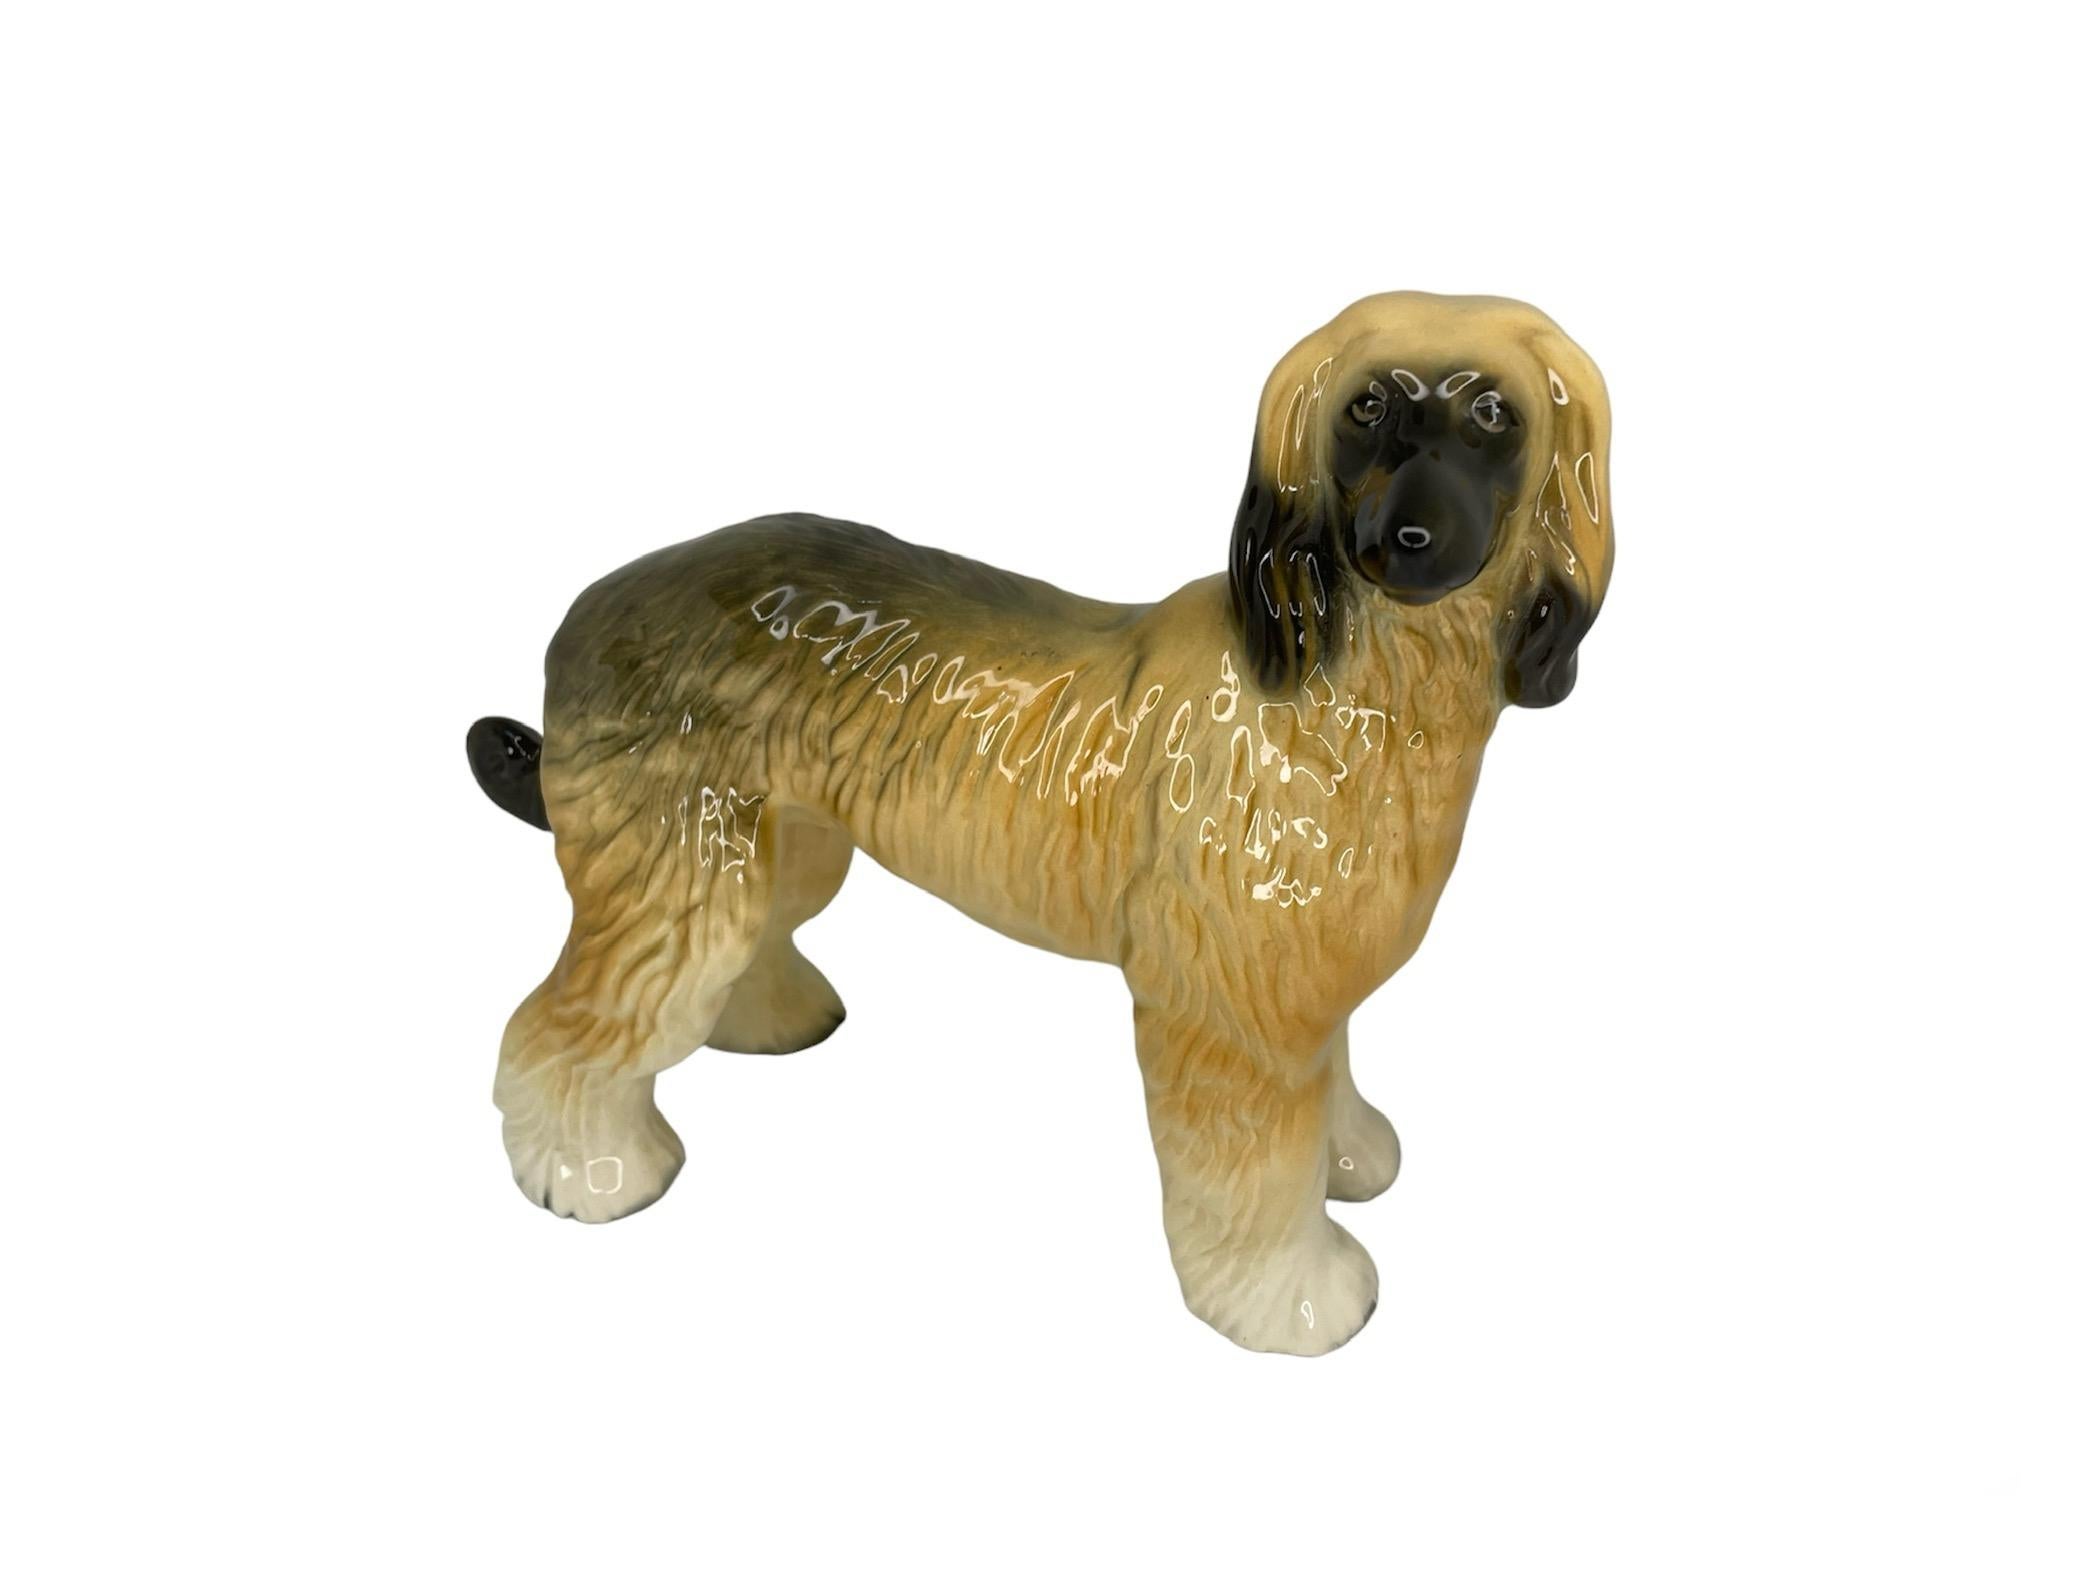 Hand-Painted Ceramic Figurine Of An Afghan Hound Dog For Sale